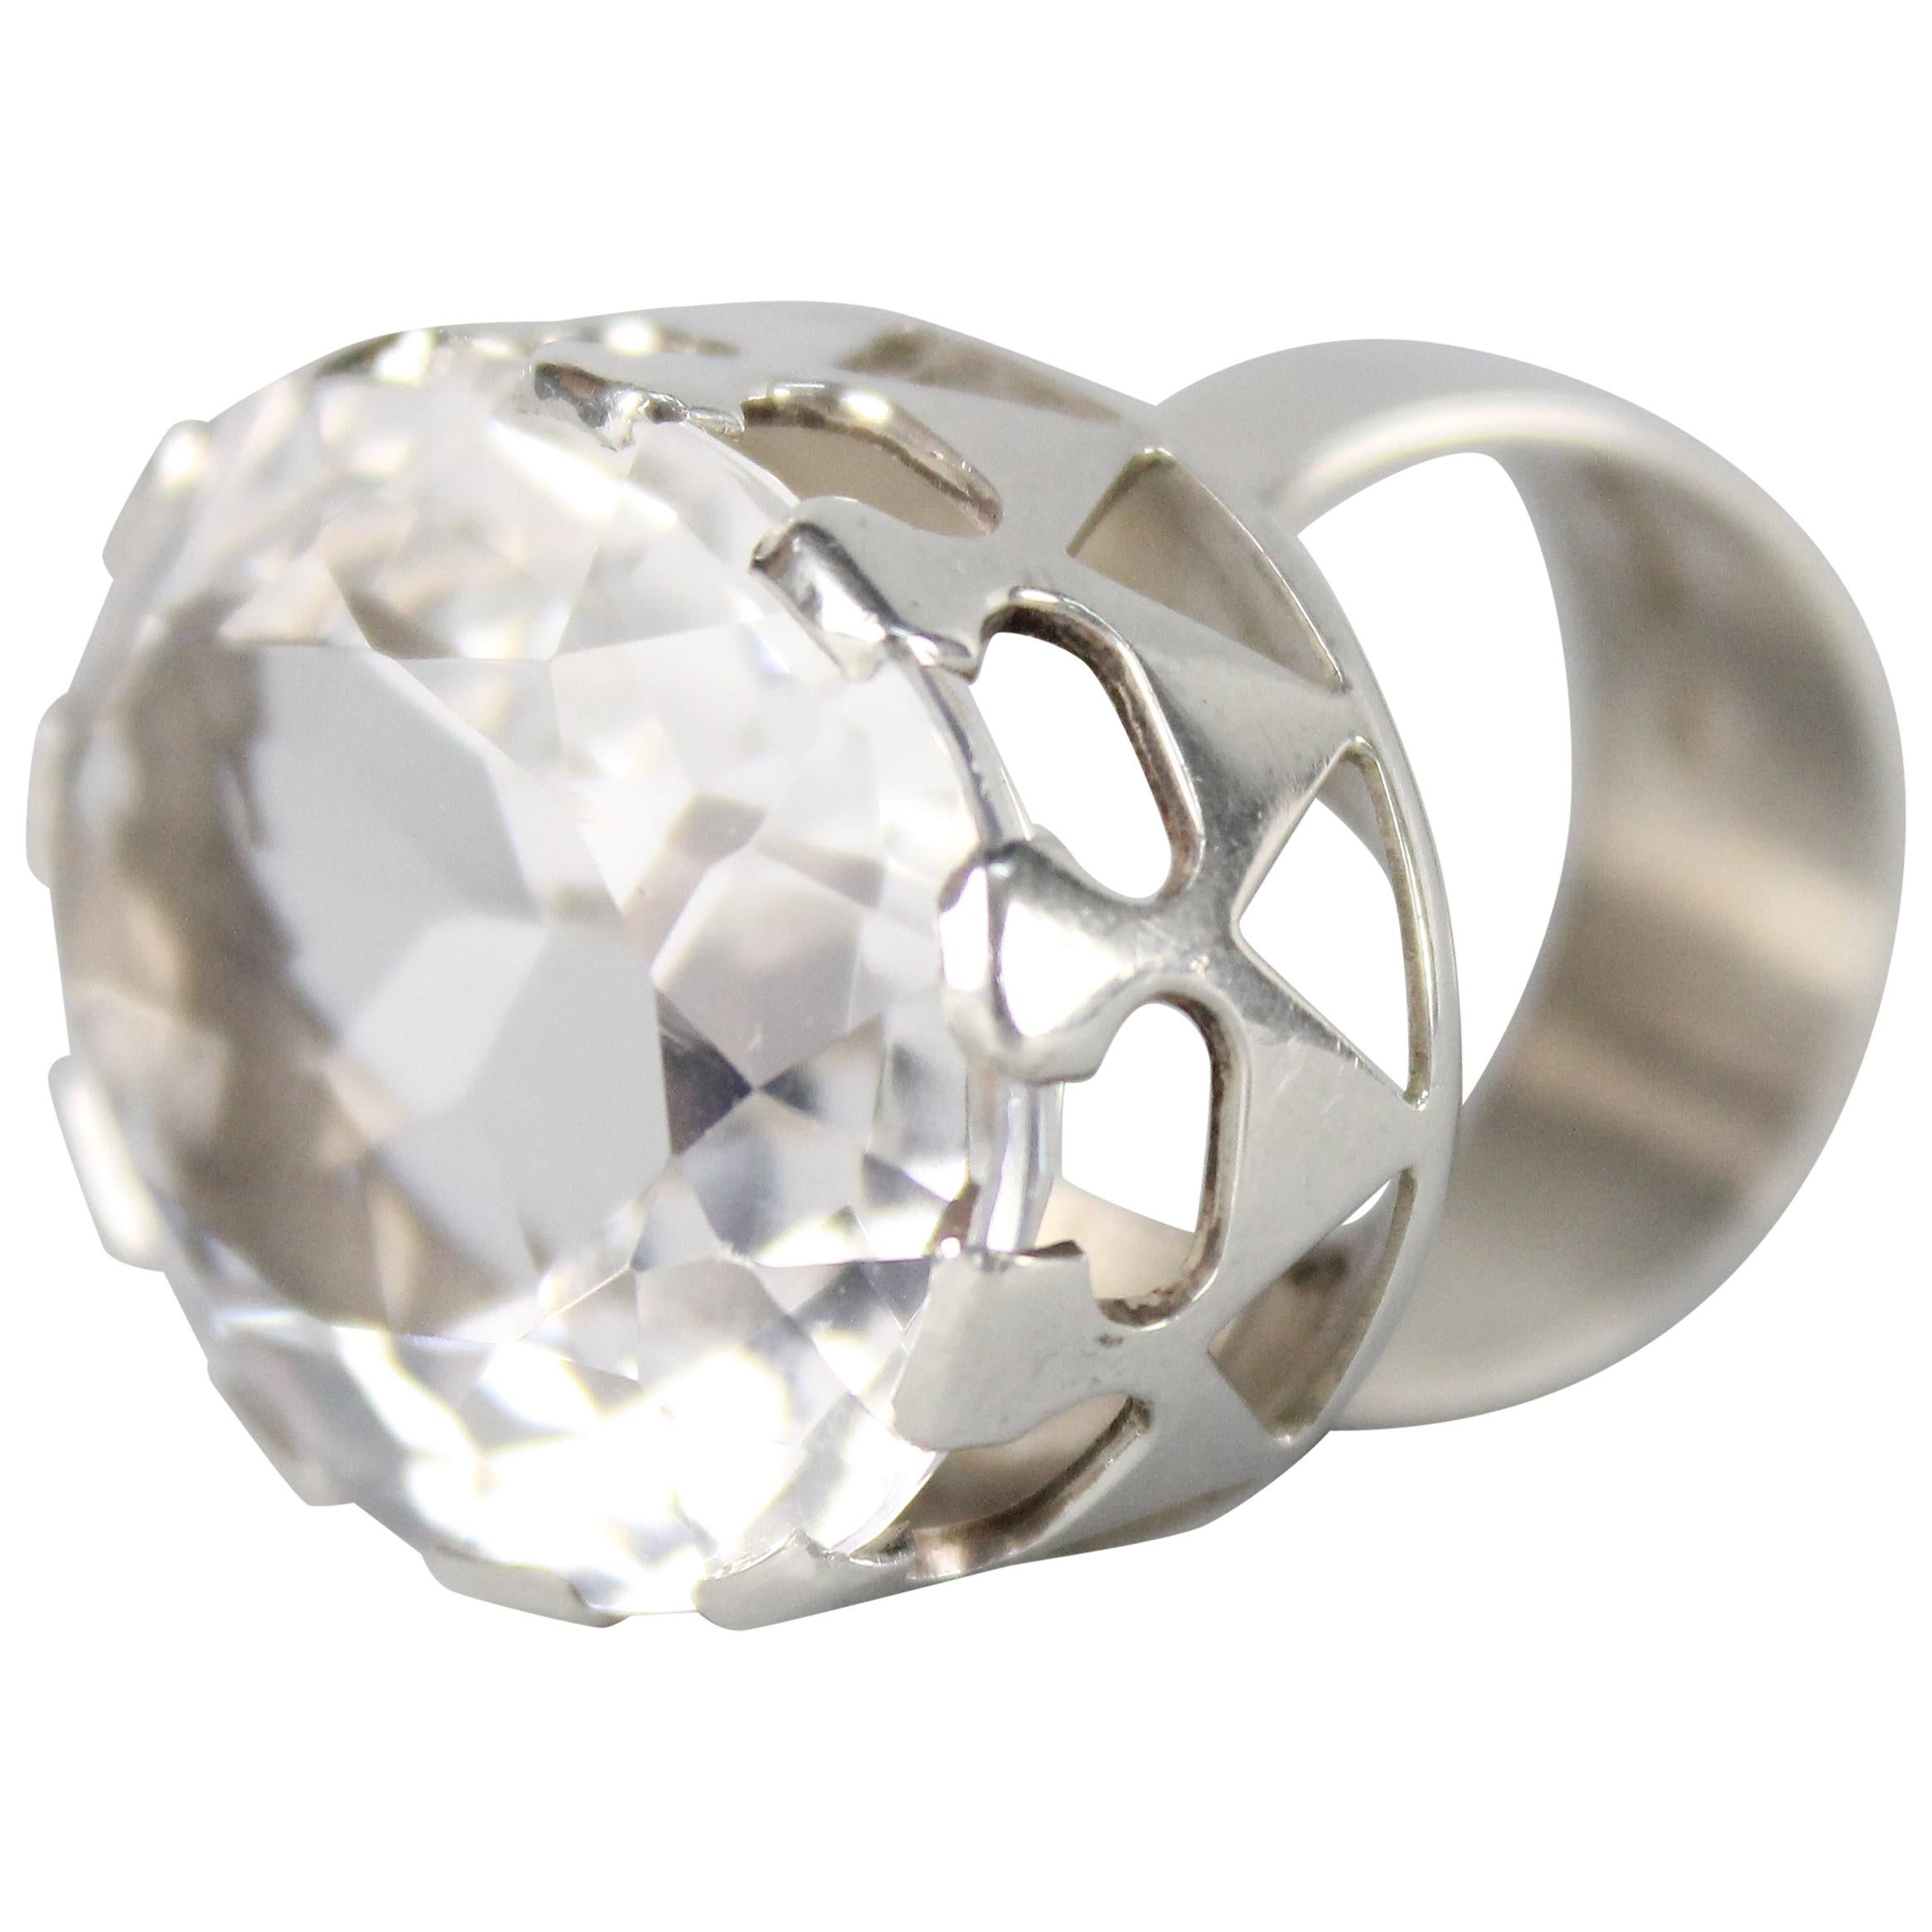 Modernist Ring in Silver and a Large Rock Crystal by Kaplan, Stockholm, 1968